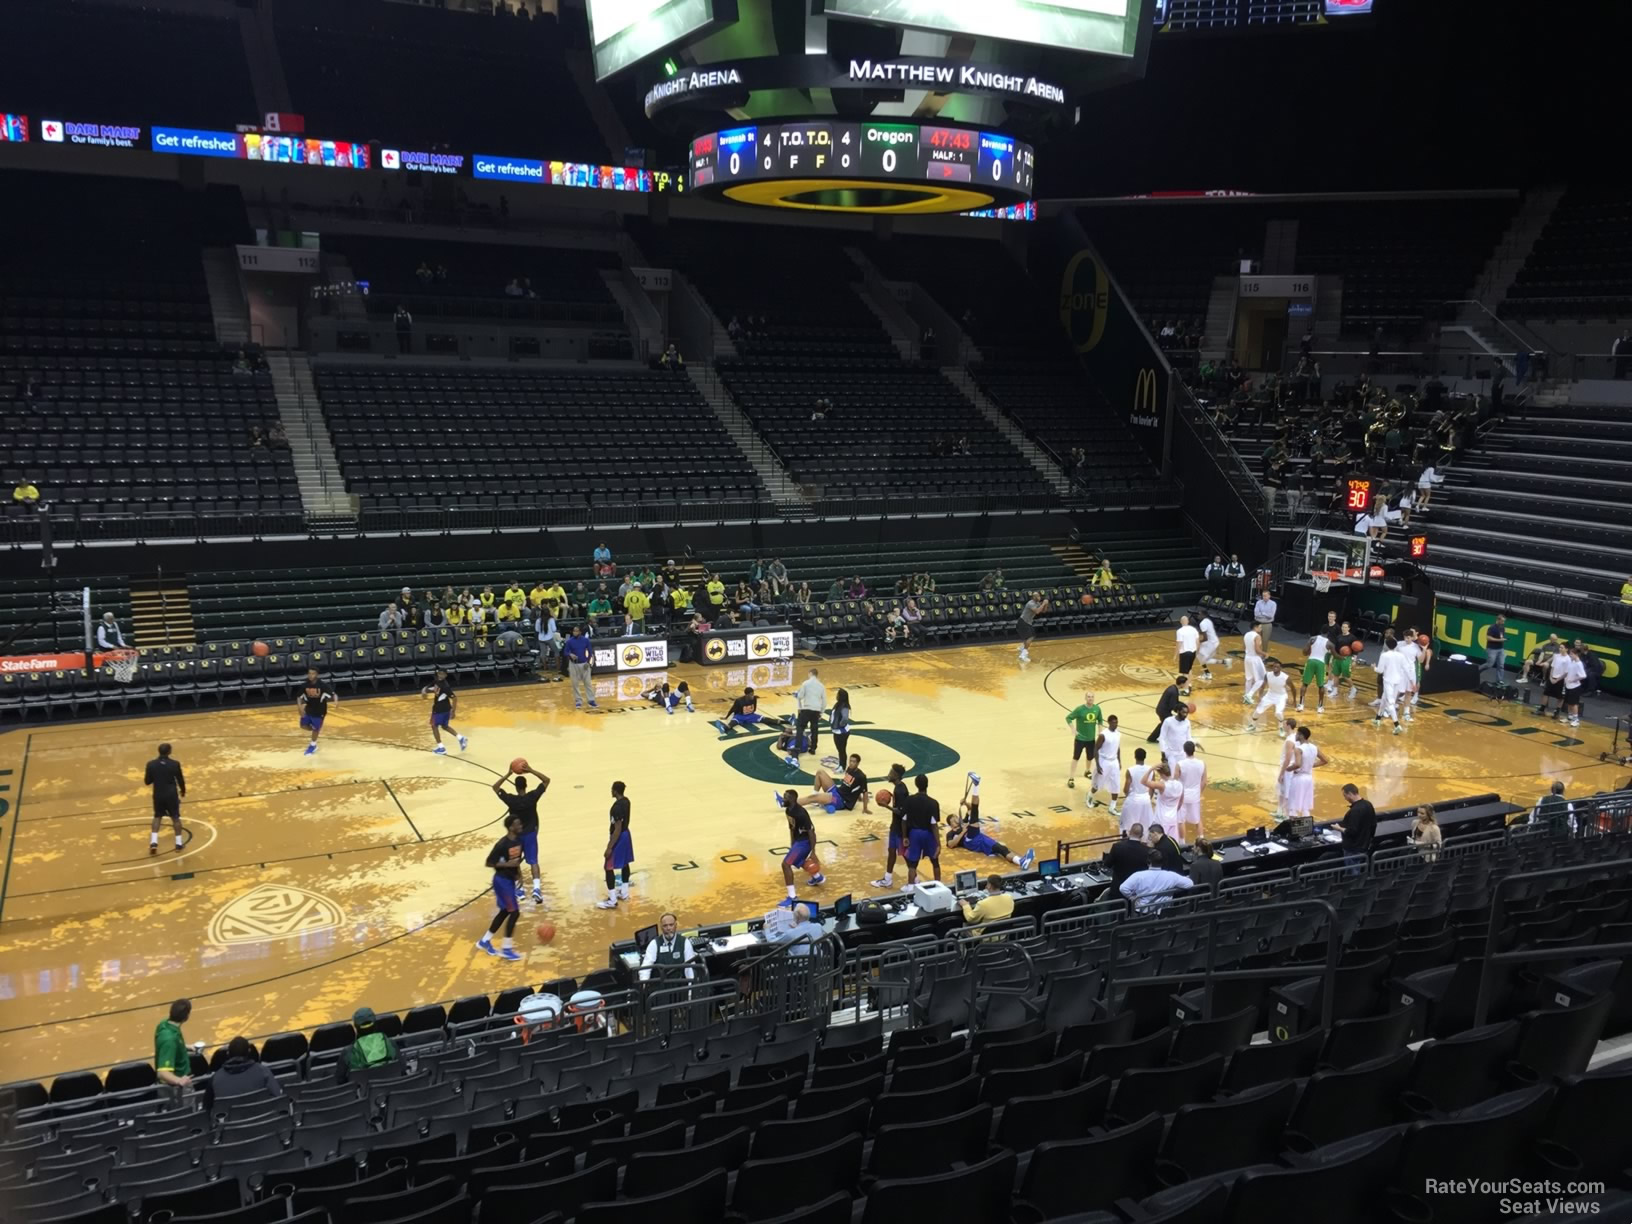 section 104, row k seat view  - matthew knight arena